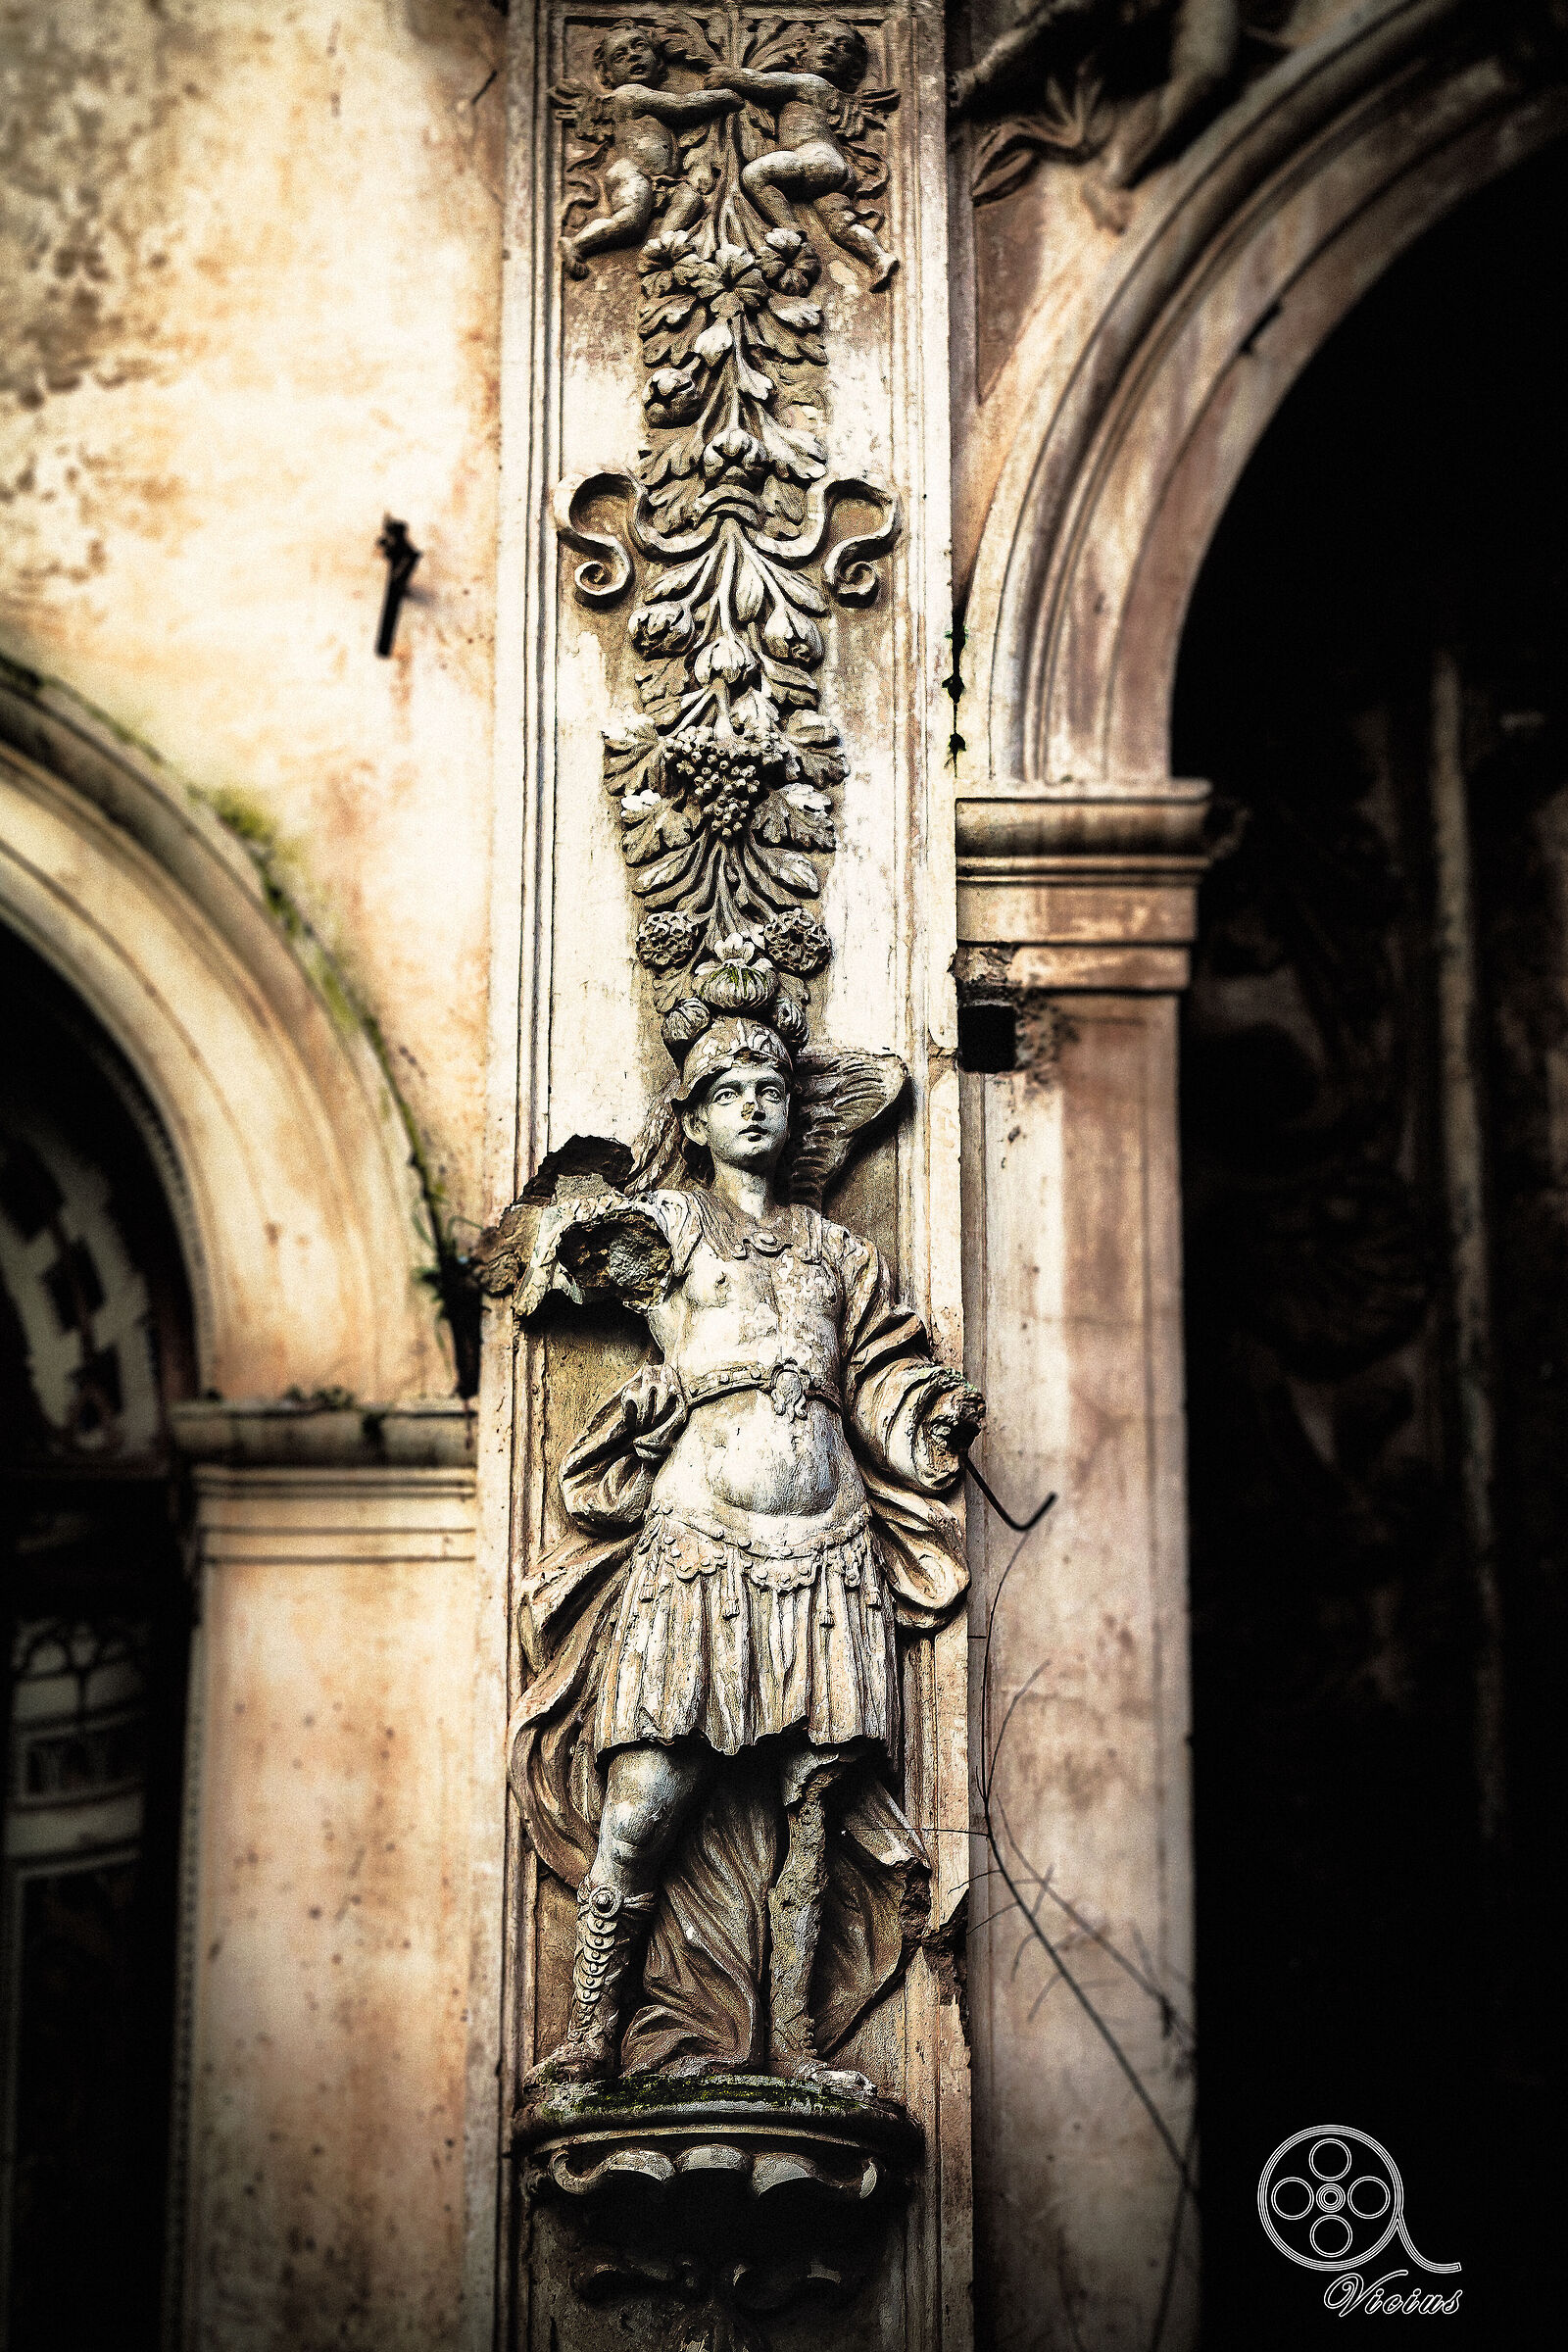 Baroque Sculpture (St. Philip and James Church) Canic...